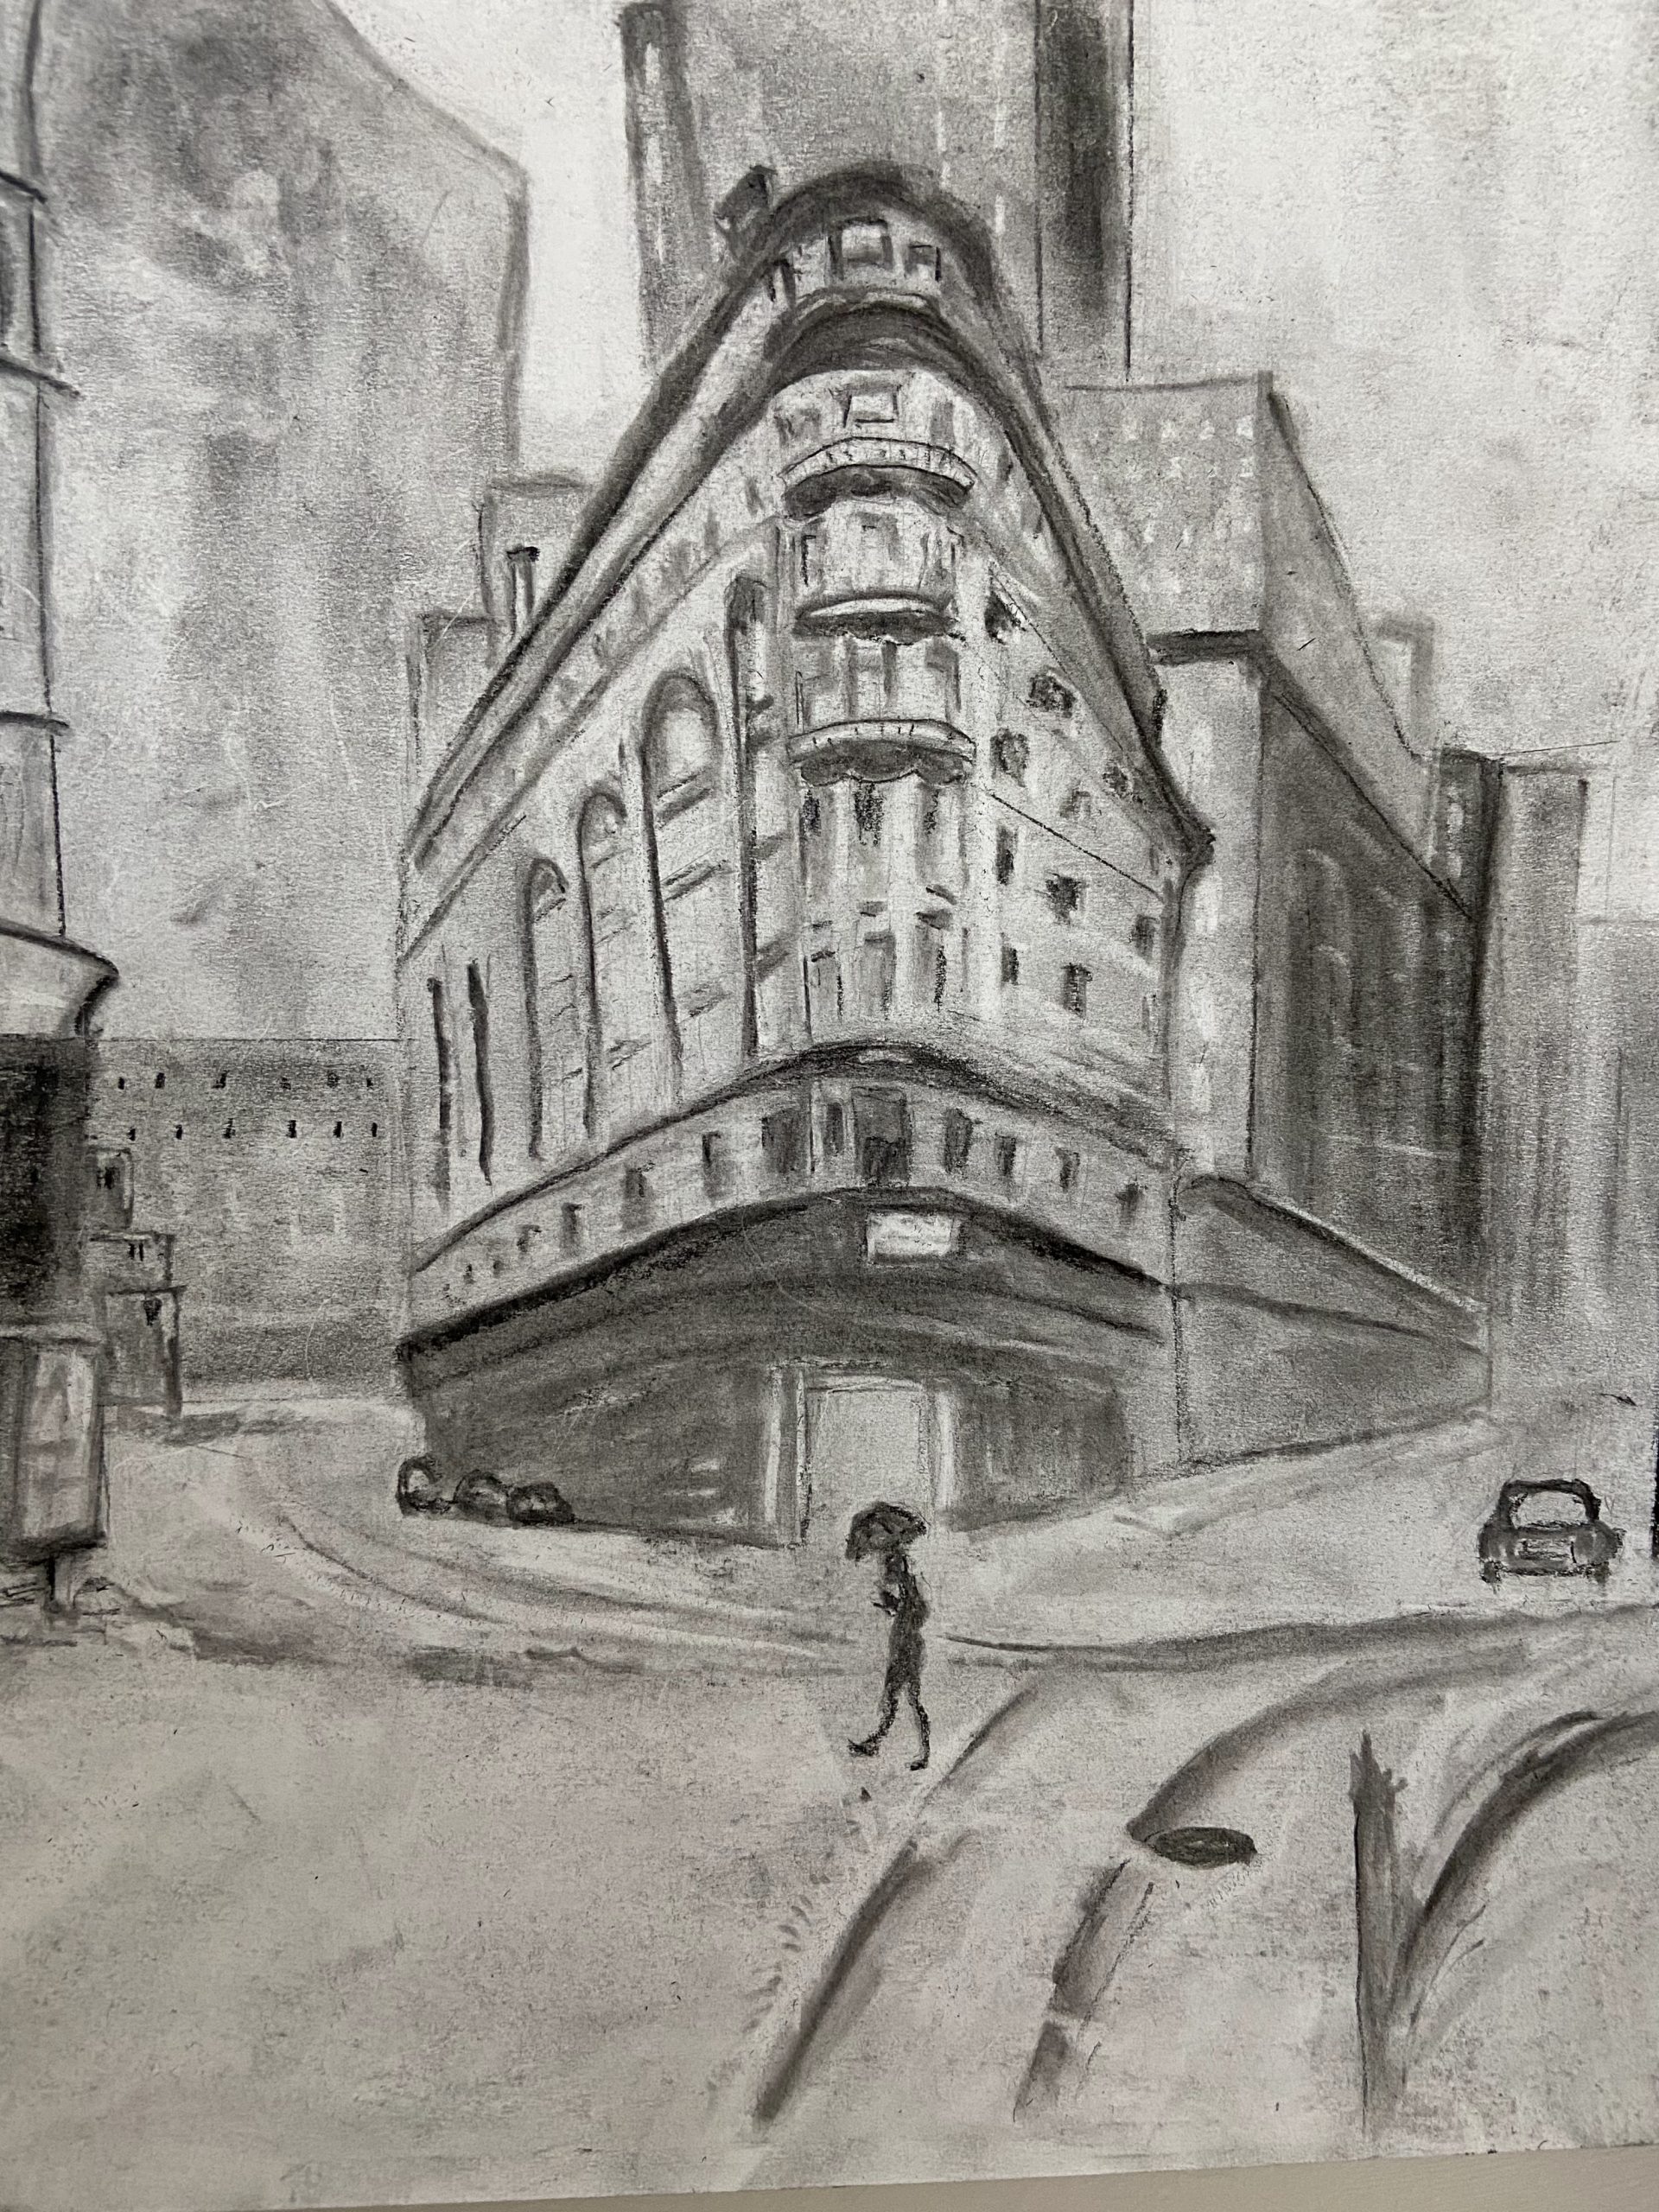 Charcoal drawing of teh Flatiron Builidng in New York City